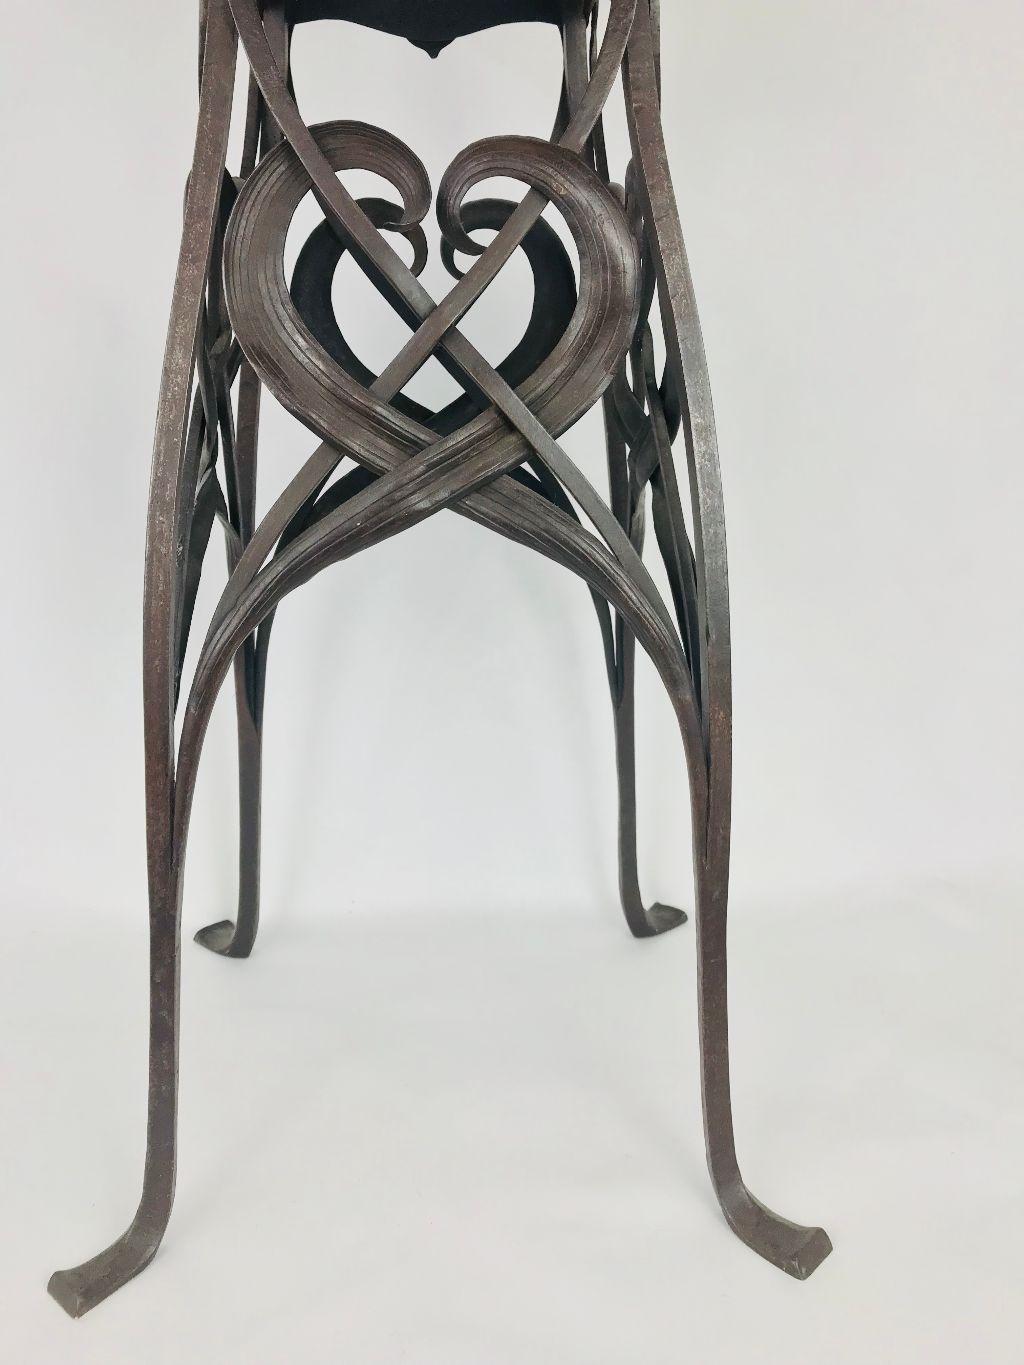 Absolutely outrageous handwrought Art Nouveau stand, circa 1900. Iron base with excellent patina supports a steel top with repousse brass border and riveted iron corner brackets. Attributed to German sculptor Hermann Obrist (1863-1927). Tabletop is